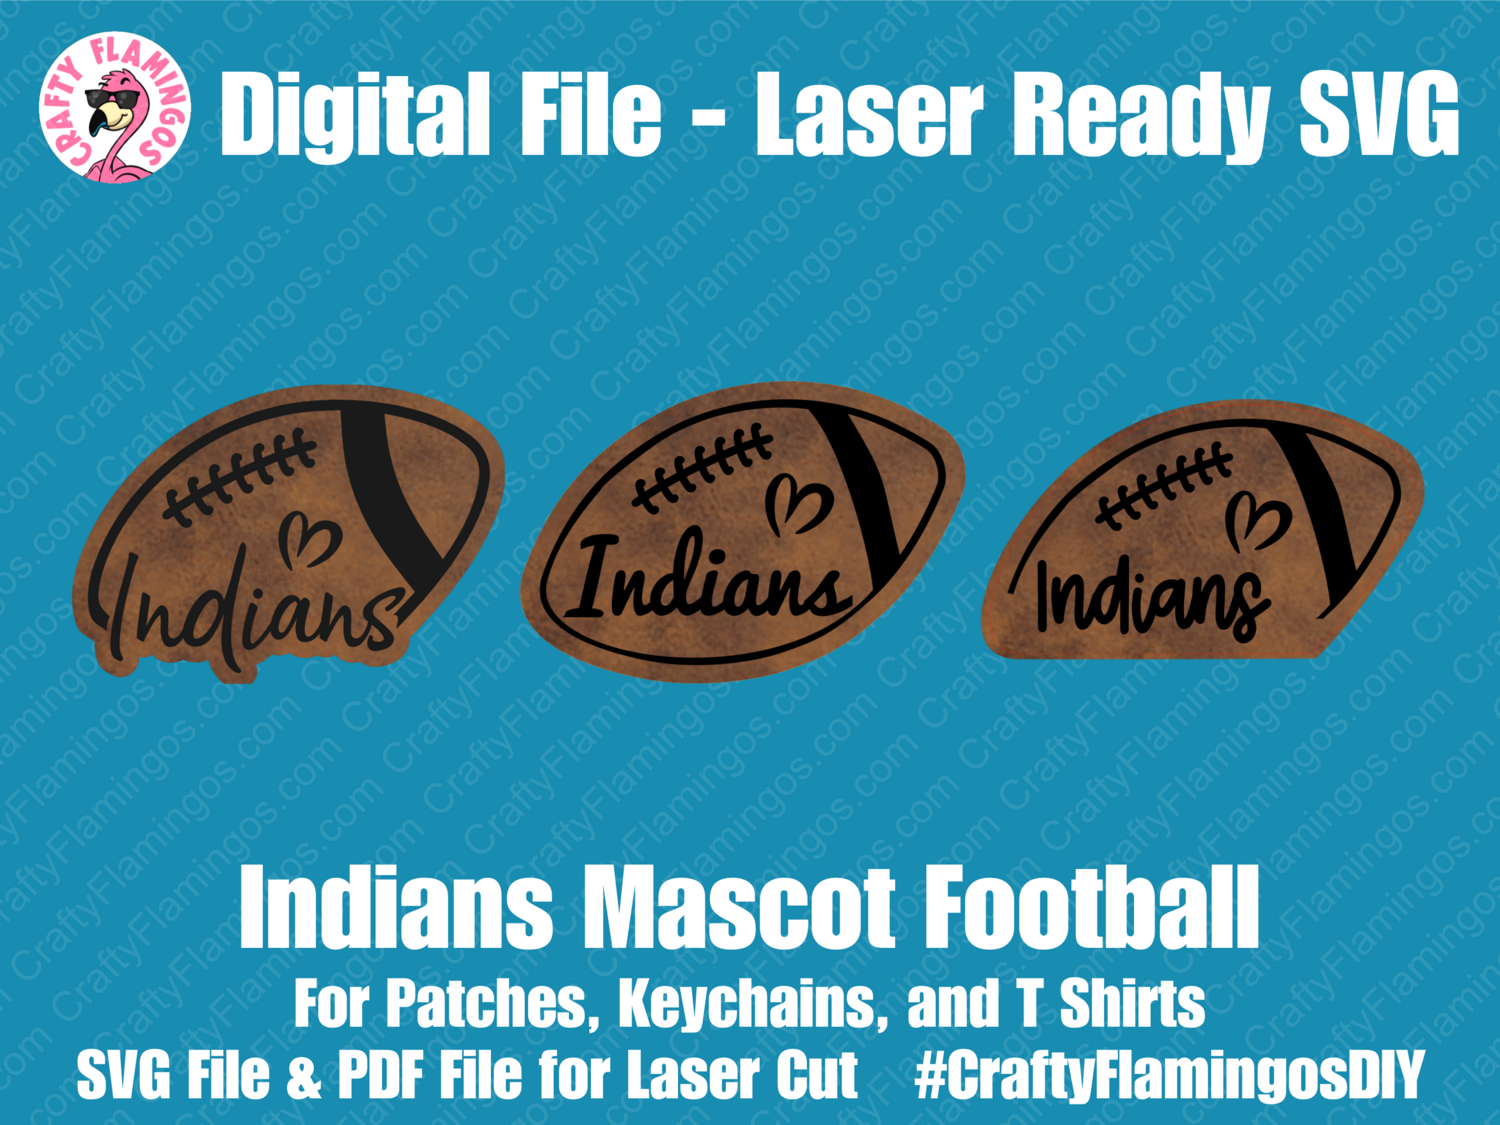 Indians Football Patch - 3 styles - Patches, Keychain, & Tees - SVG Laser Glowforge Cut File Digital Download PDF